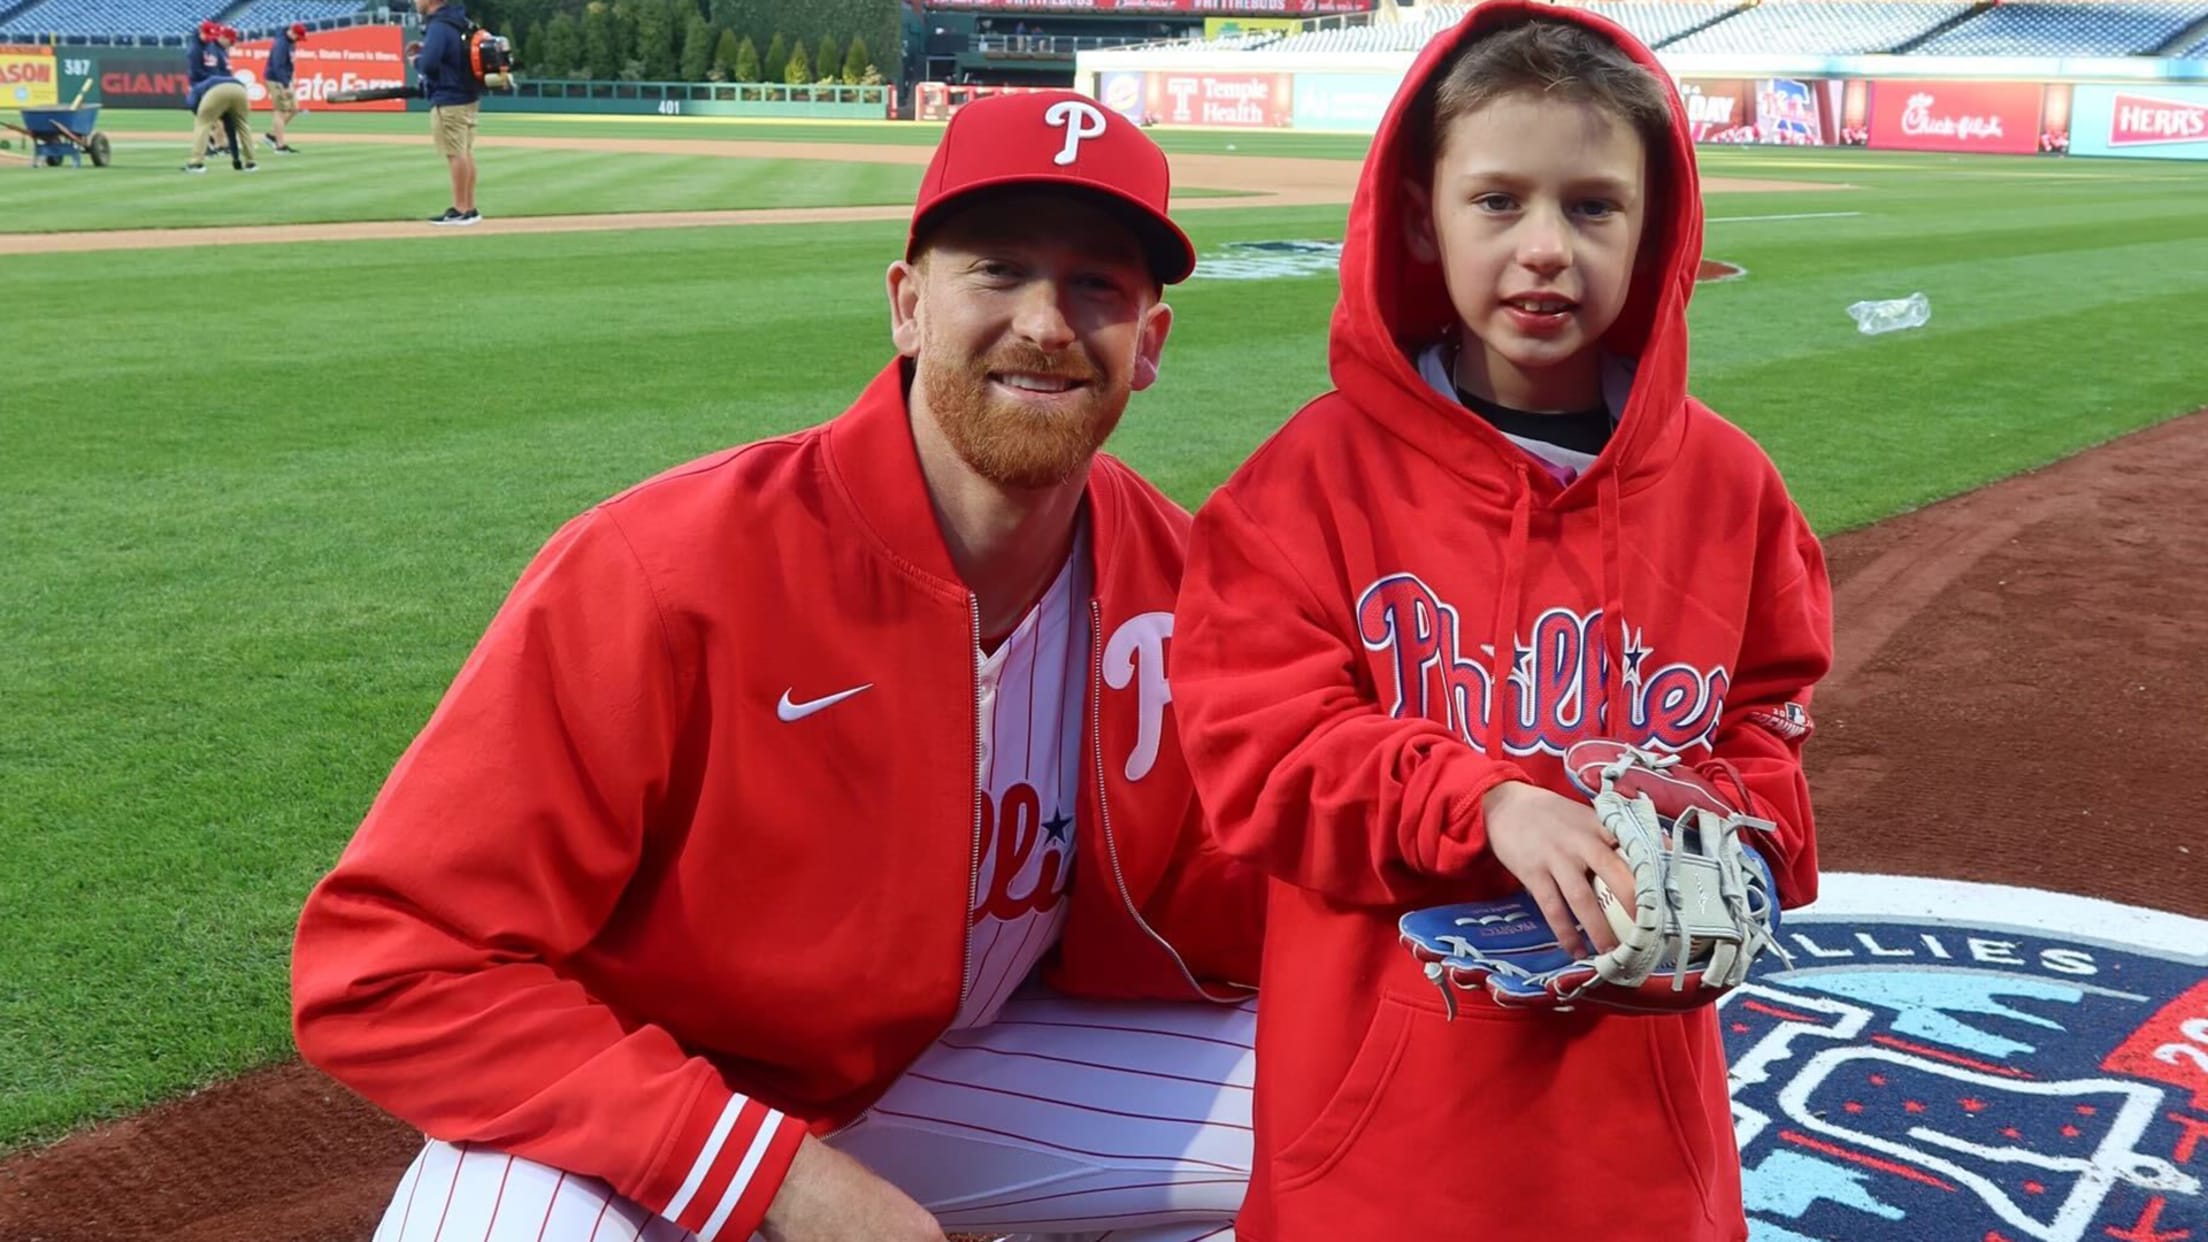 A young Phillies fan had an Opening Day he'll never forget